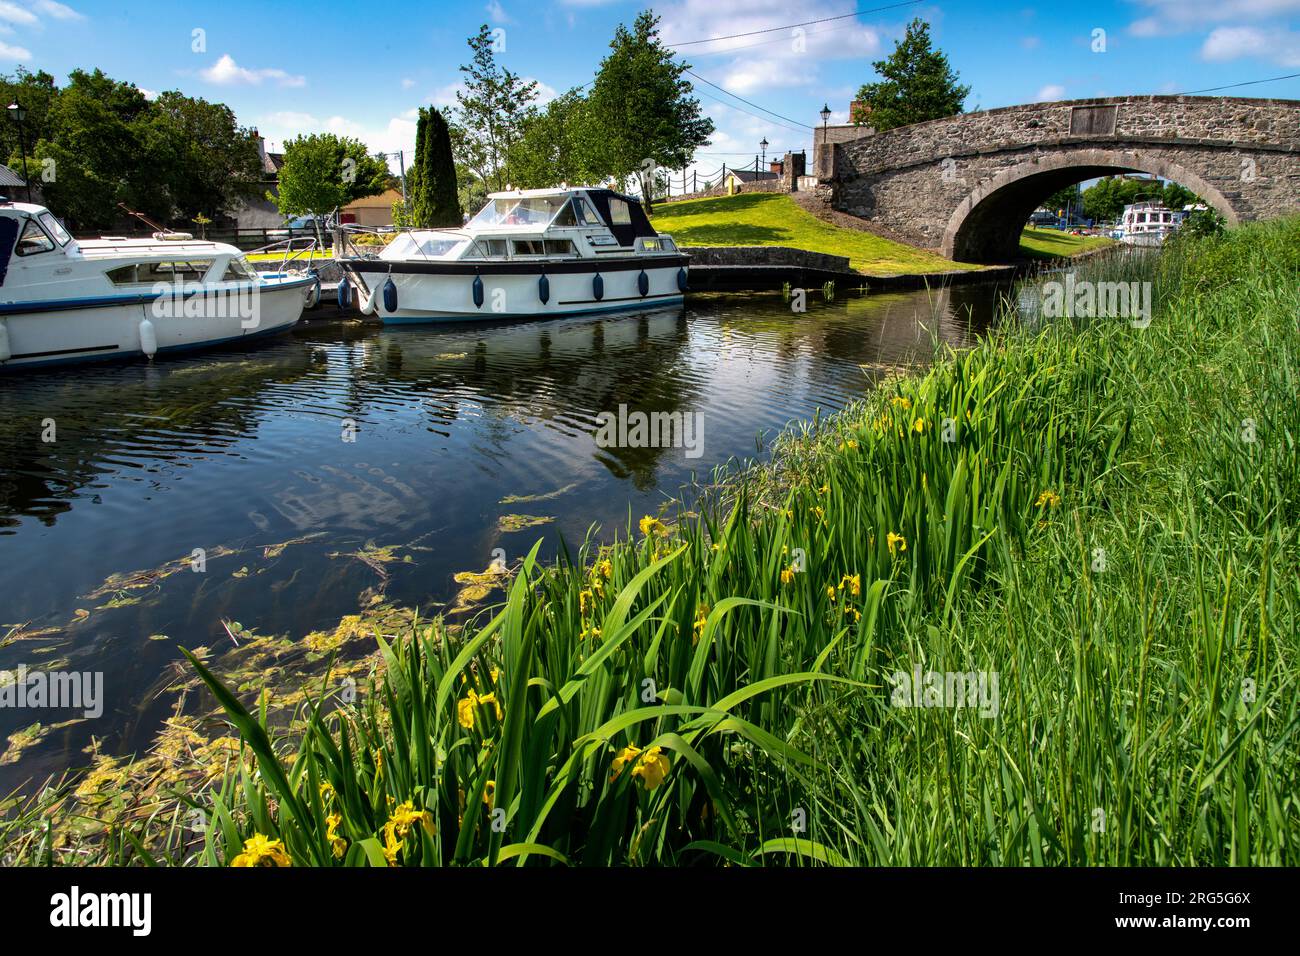 Shannon Harbour, Clonony, Grand Canal, County Offaly, Irlanda Foto Stock